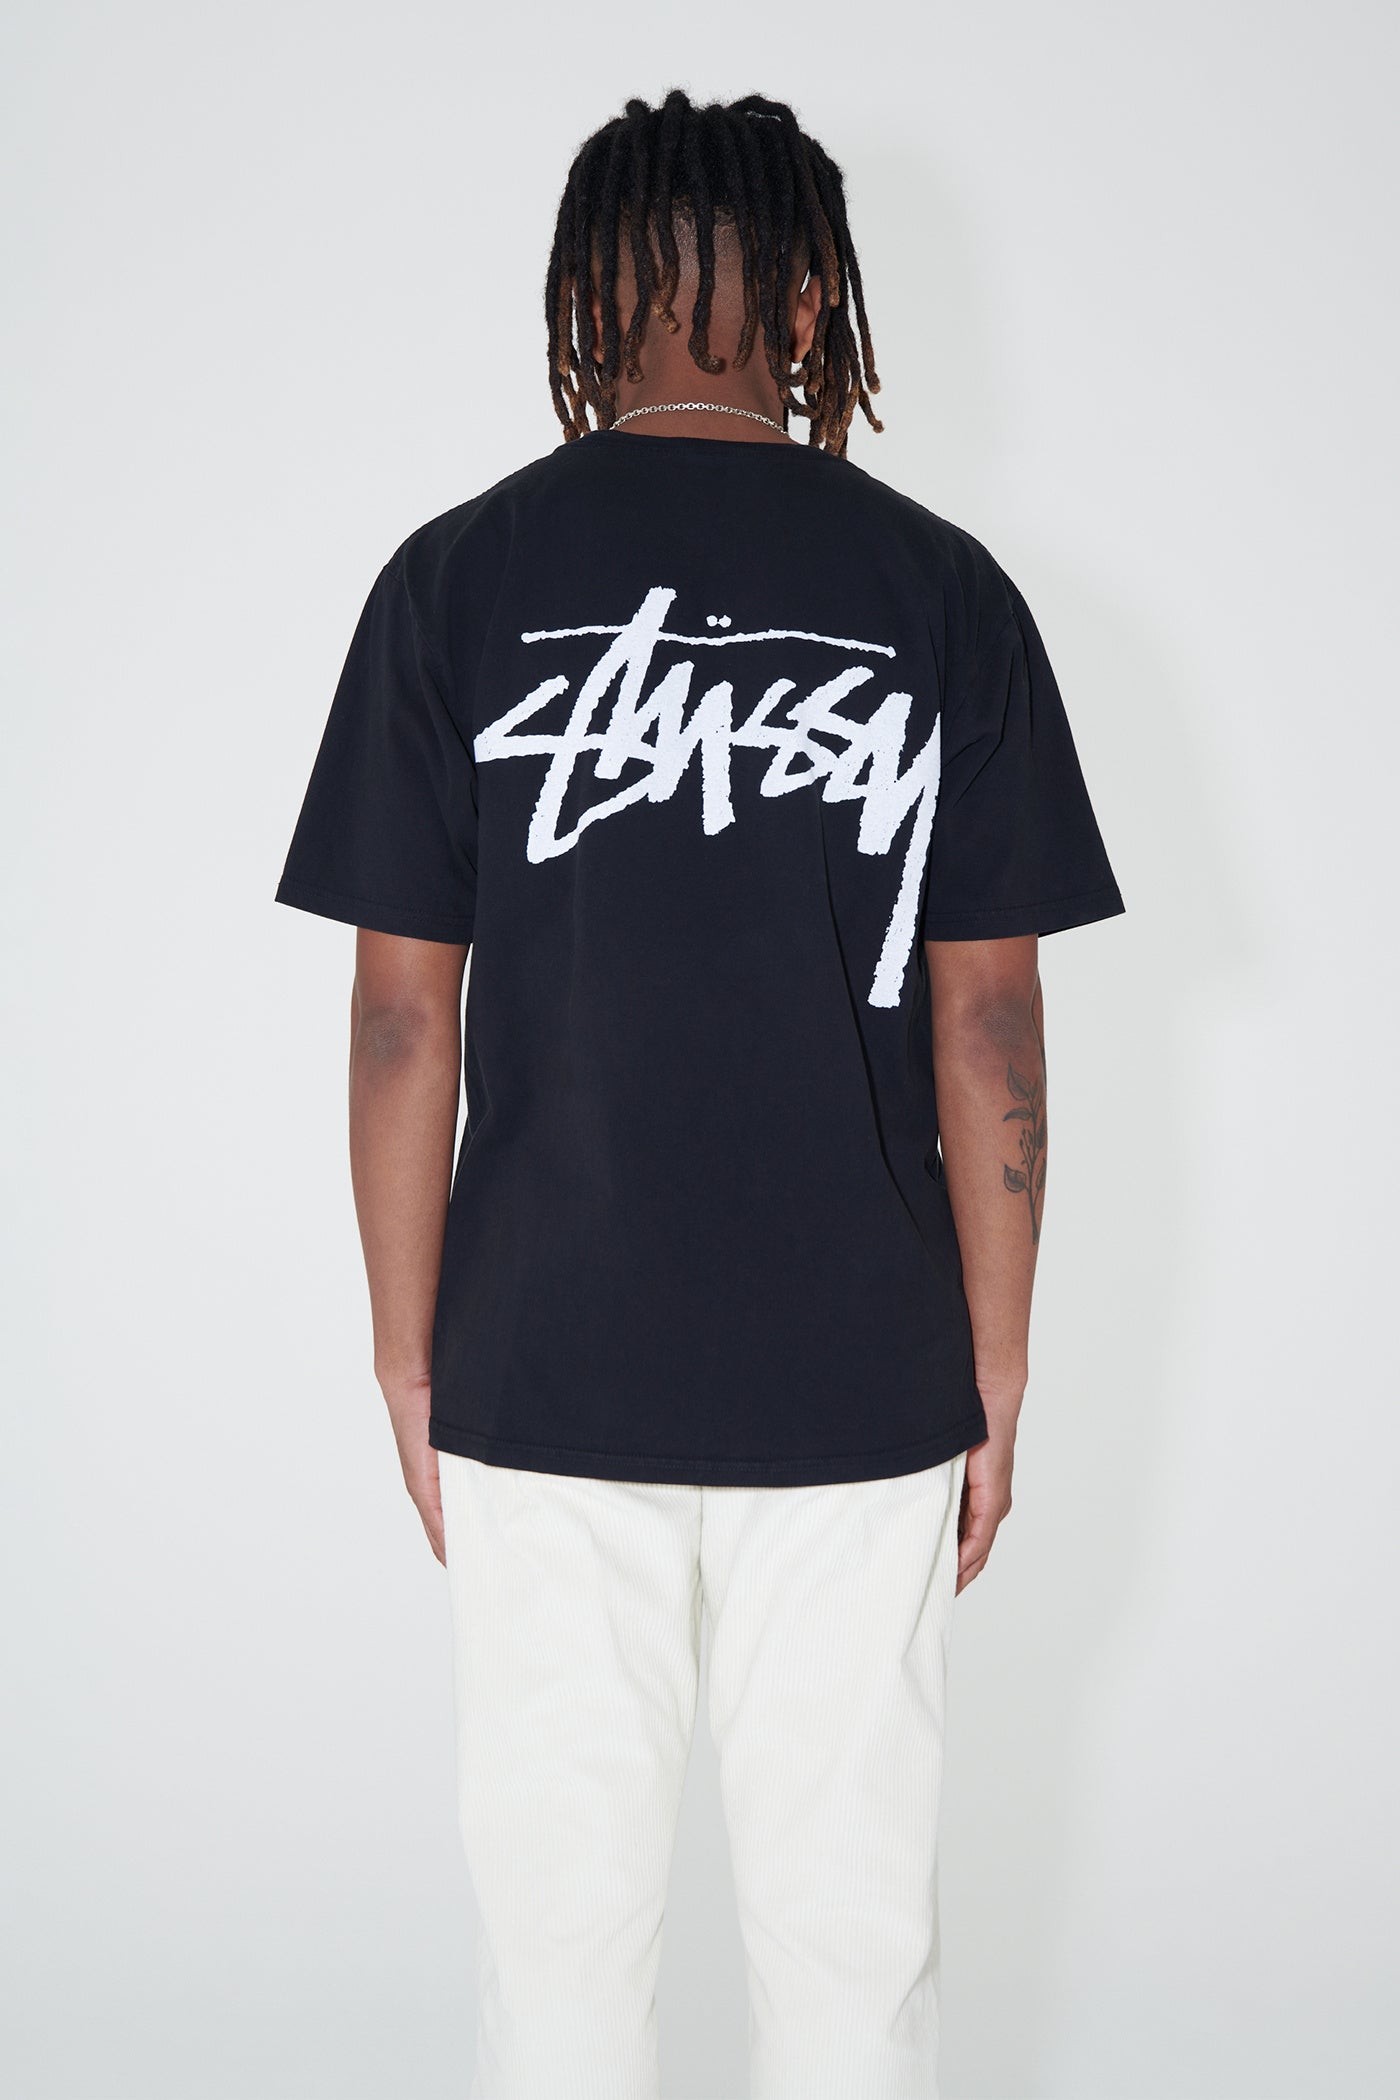 Stussy x Our Legacy Work Shop Yin Yang Pigment Dyed Tee Black - Prism Hype Stussy T-shirt Stussy x Our Legacy Work Shop Yin Yang Pigment Dyed Tee Black Clothes